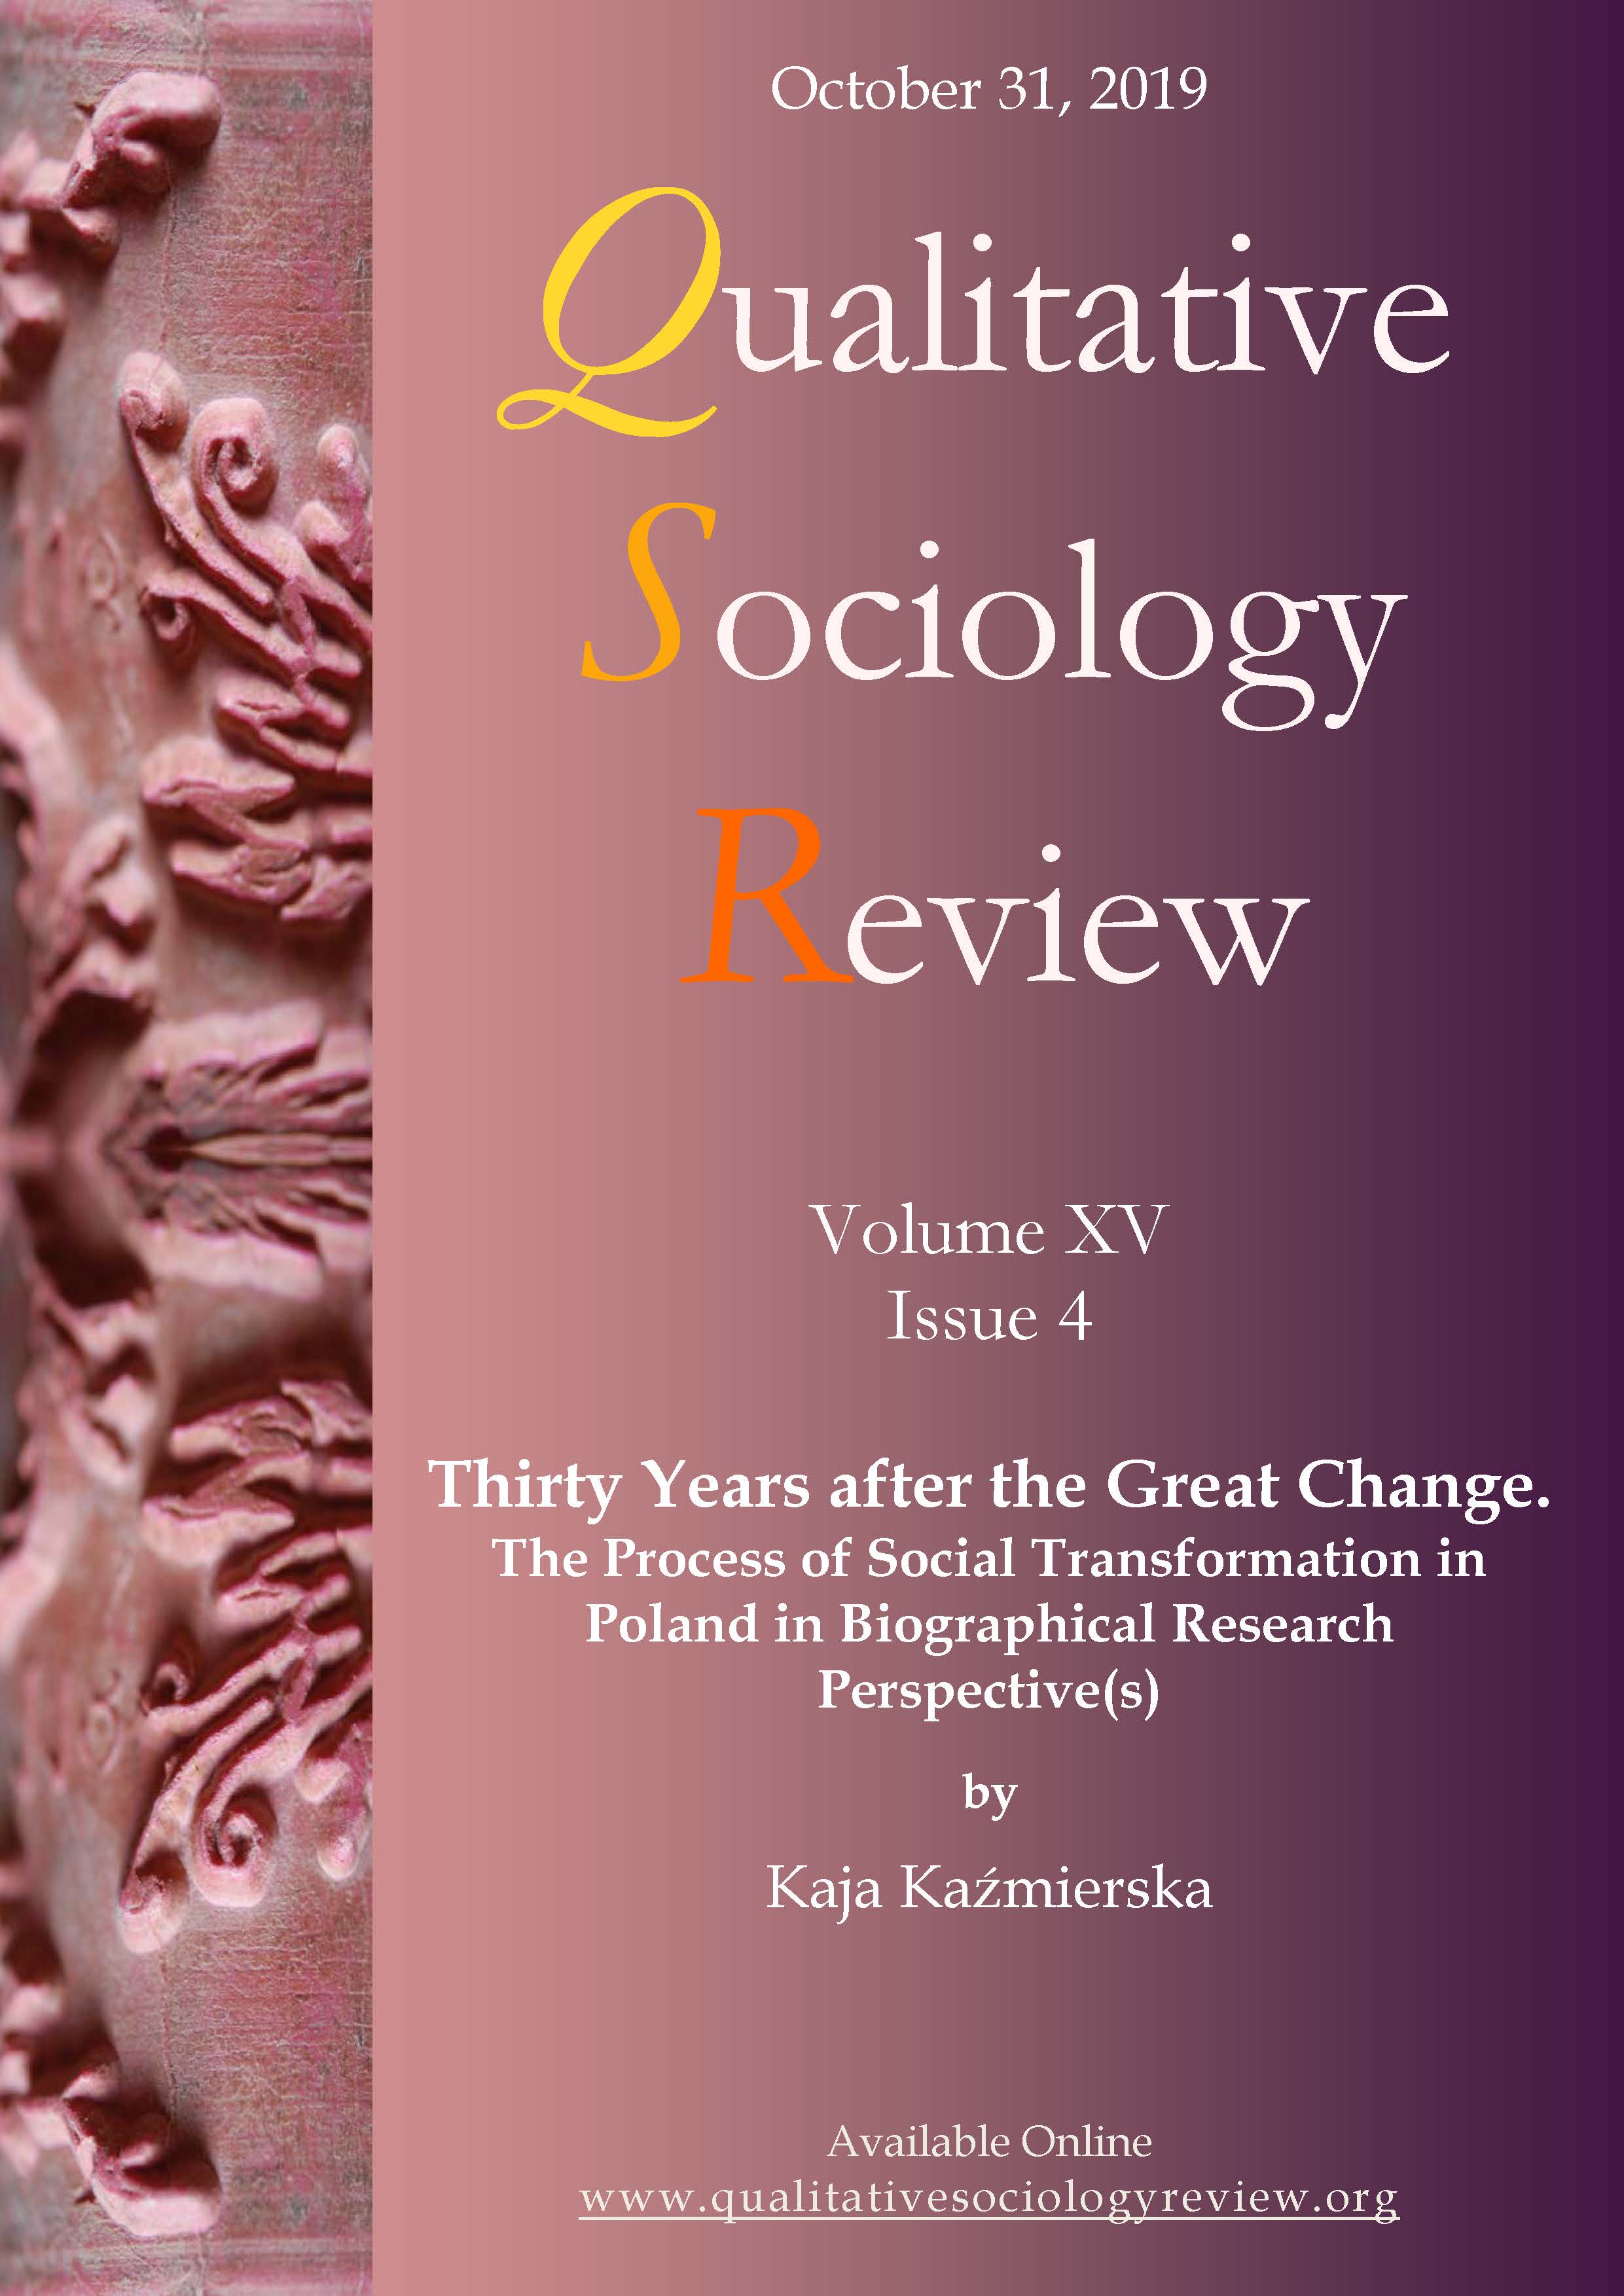 					View Vol. 15 No. 4 (2019): Thirty Years after the Great Change. The Process of Social Transformation in Poland in Biographical Research Perspective(s)
				